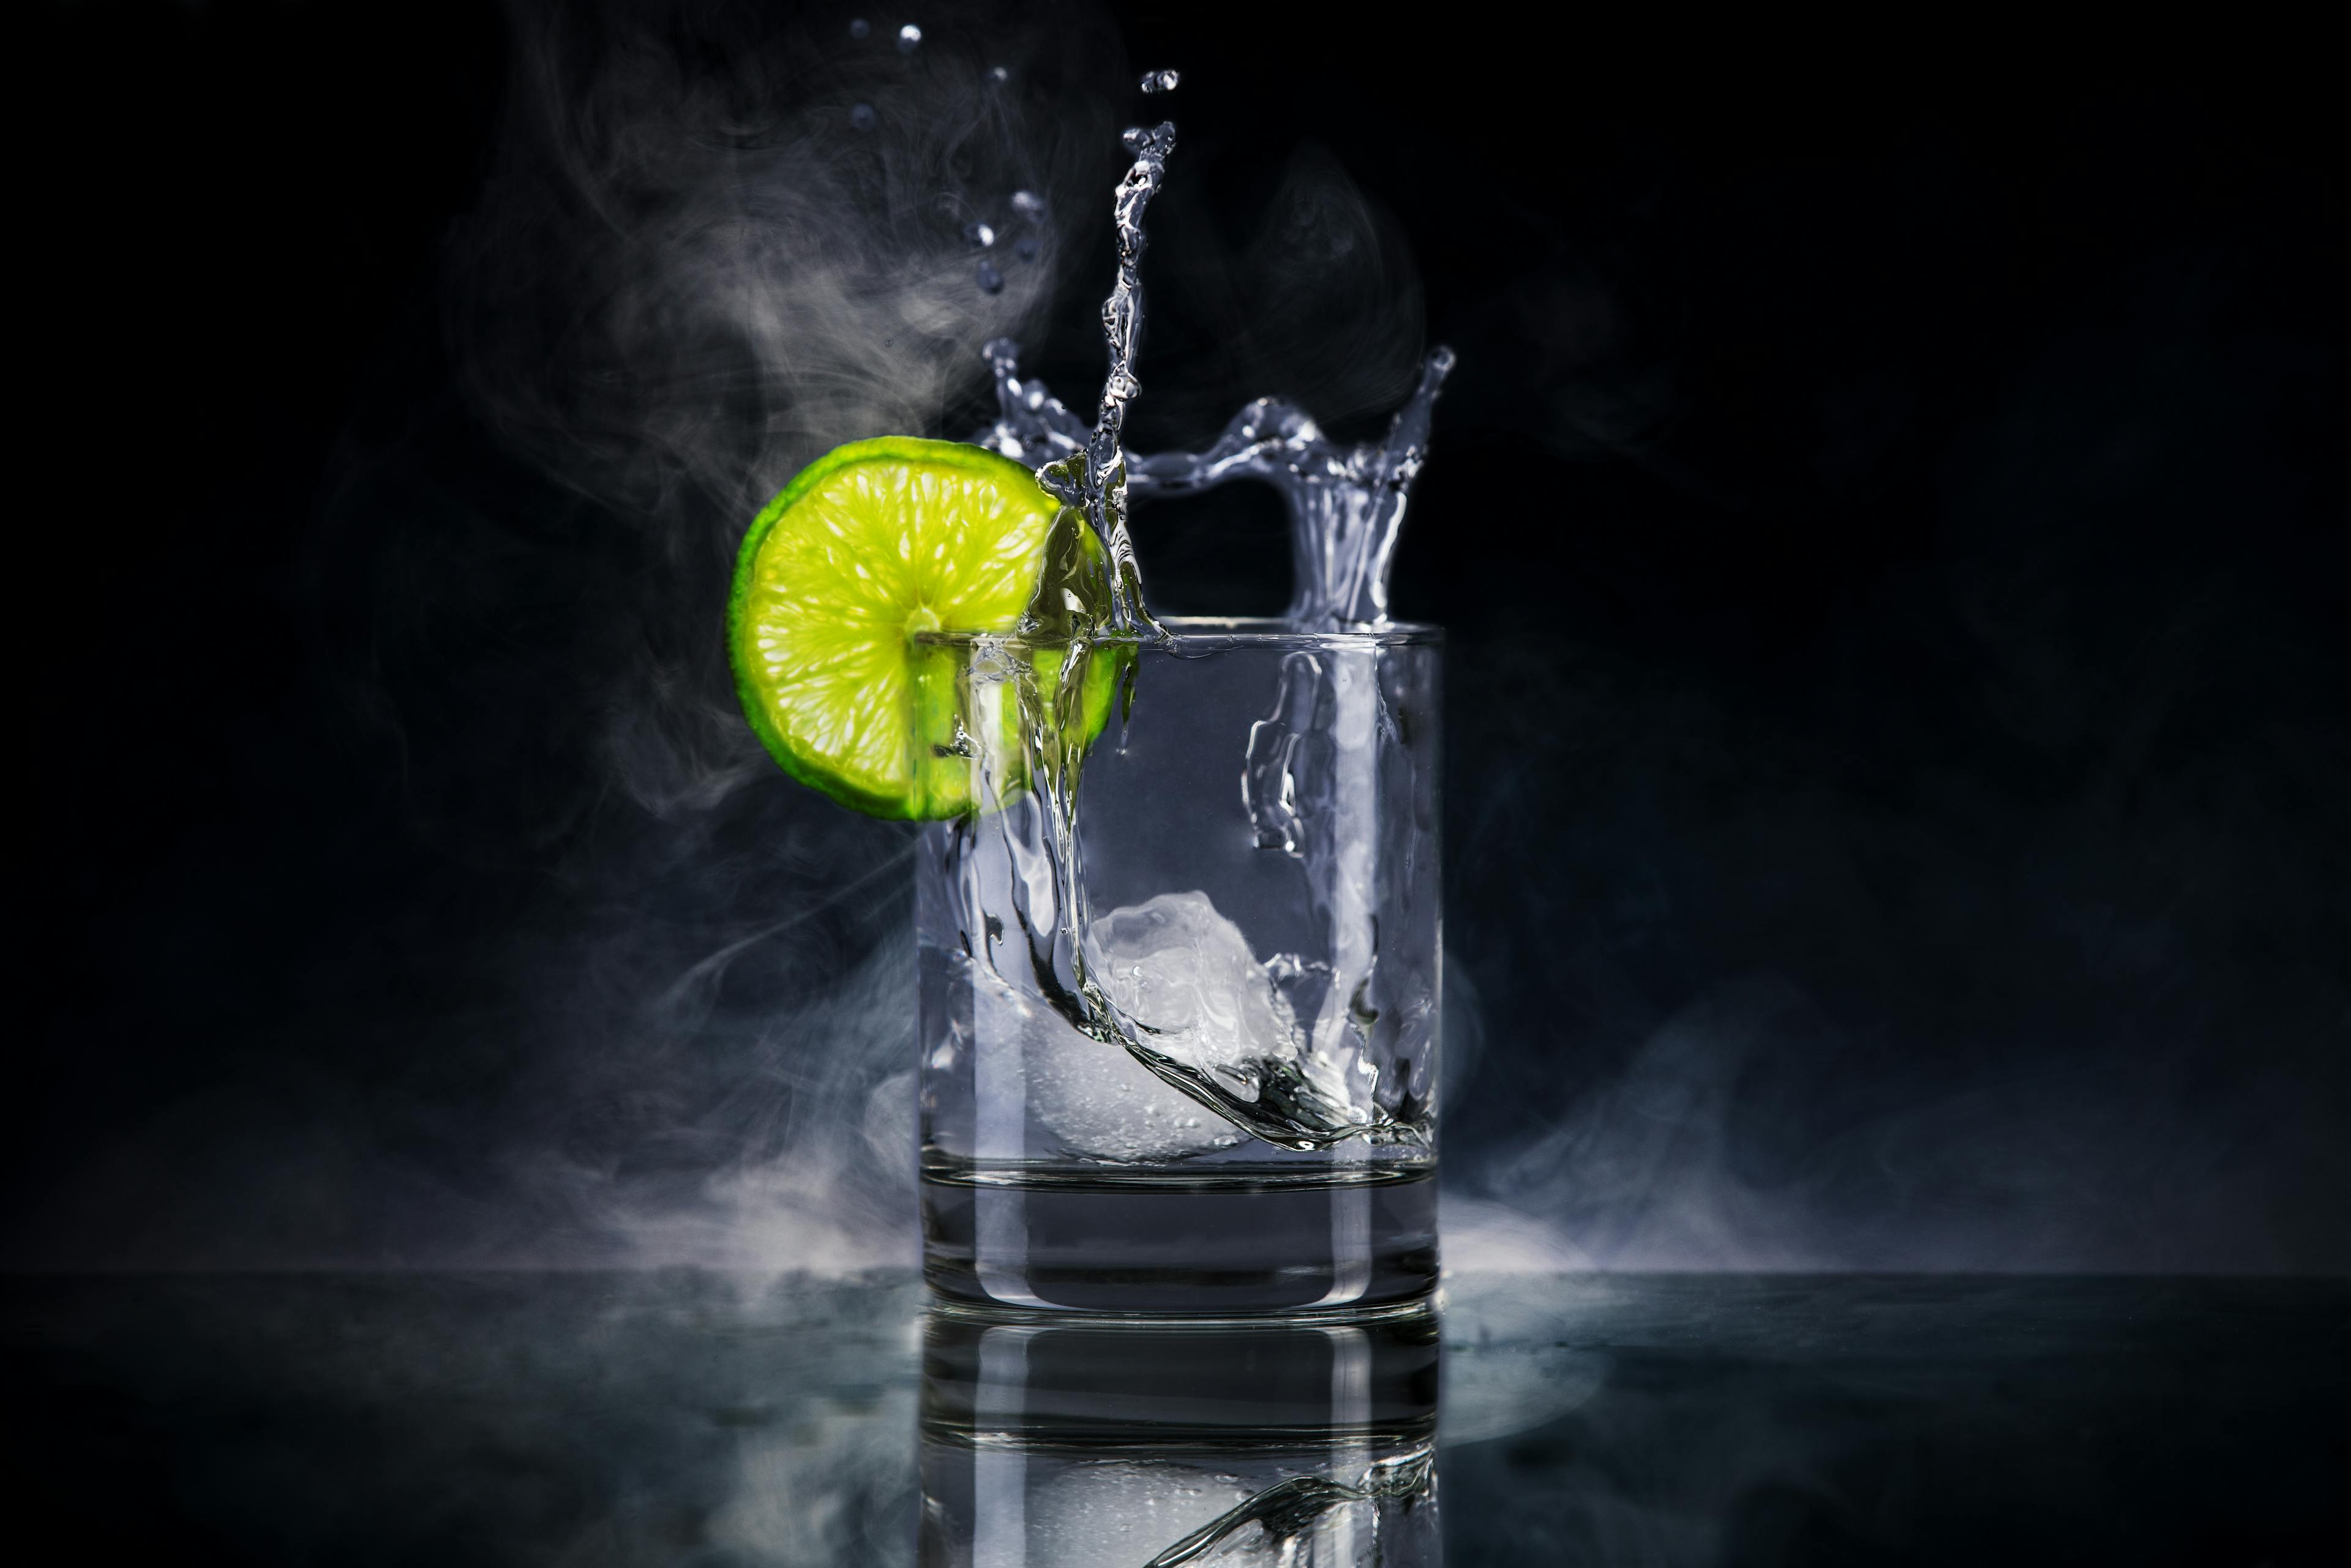 clear low ball glass holds vodka and the action shows a cube of ice being dropped into the glass, which has a slice of lime on the rim with a smoky black background